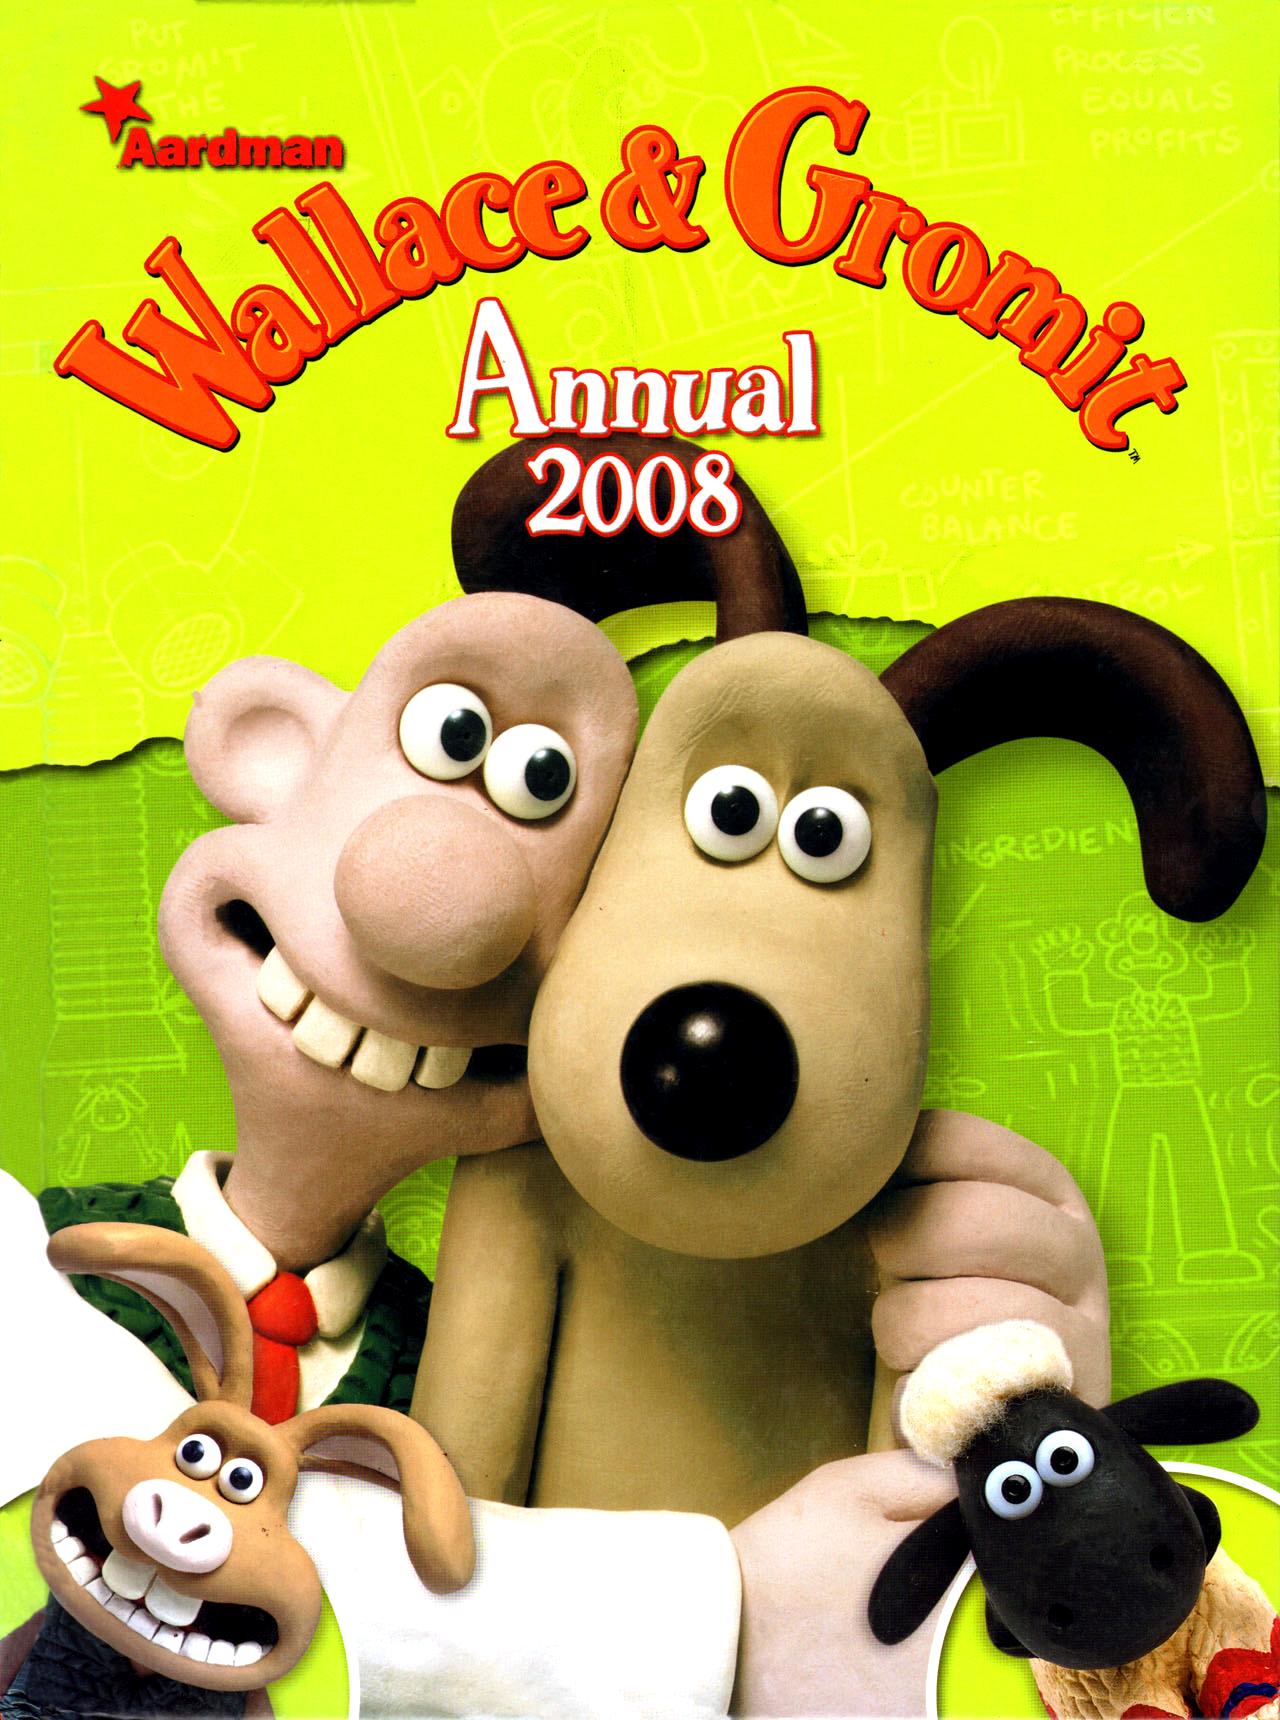 Read online Wallace and Gromit Annual comic -  Issue #2008 - 1